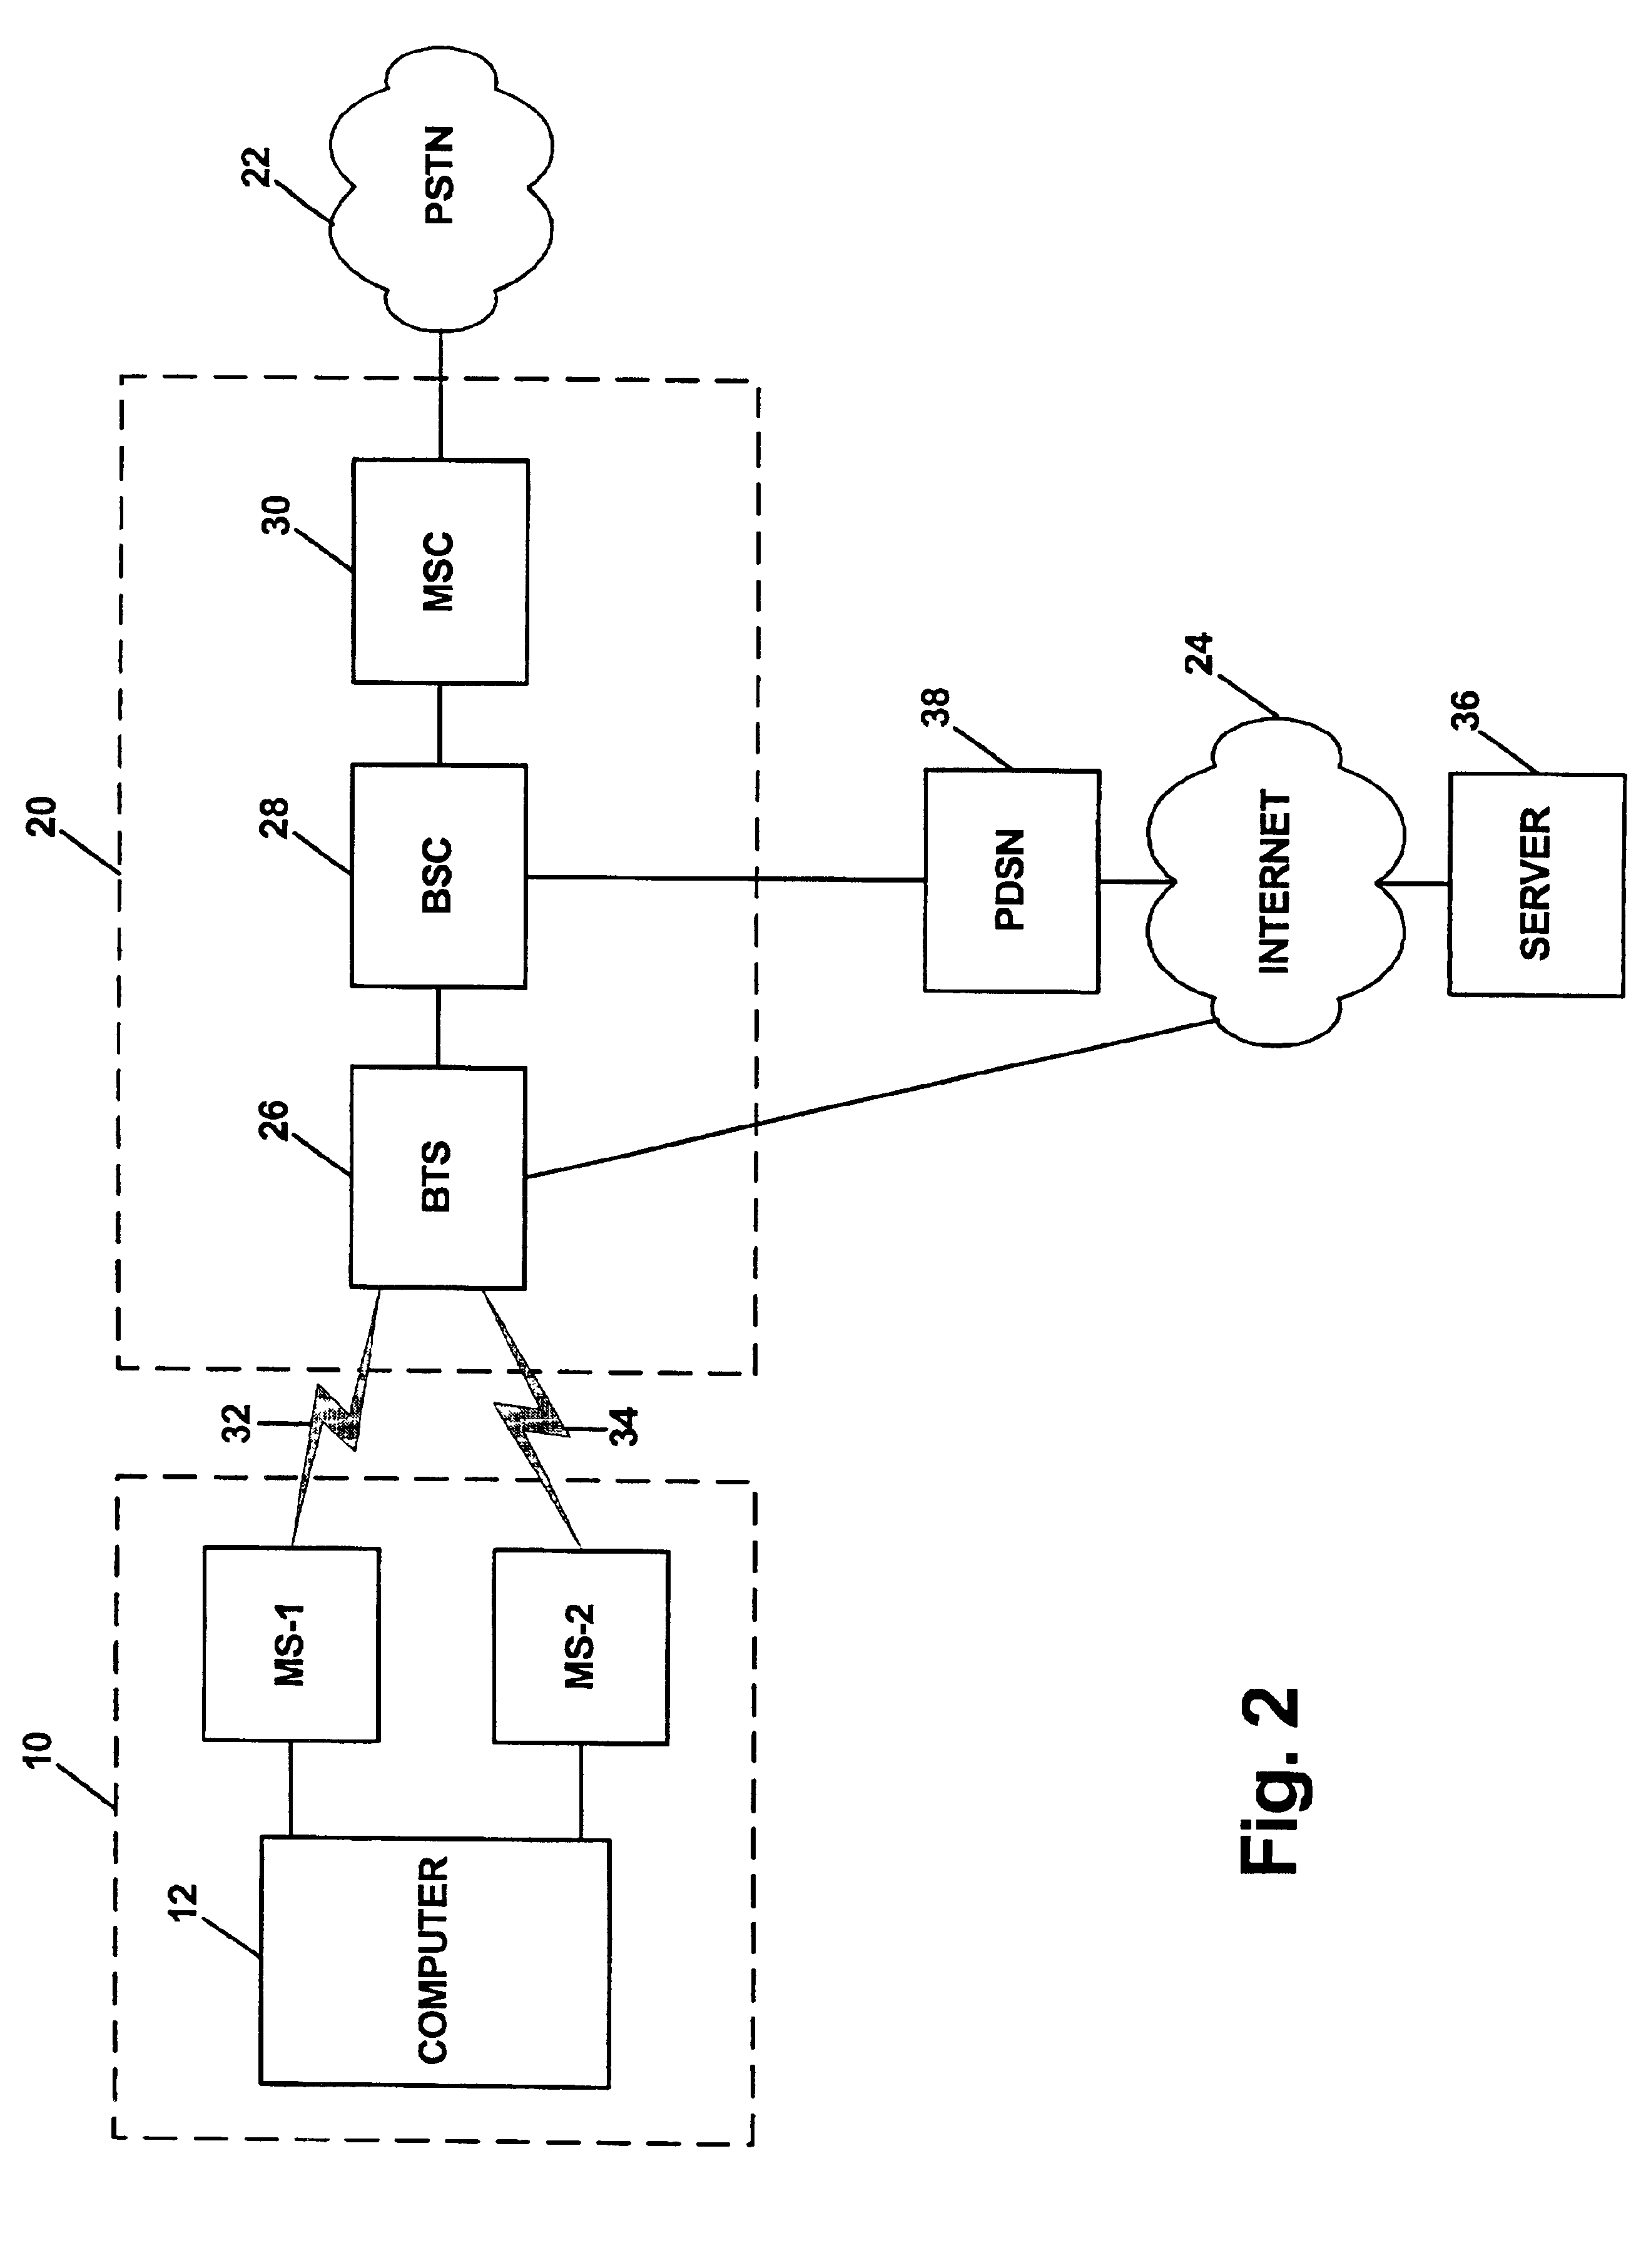 Method and system for monitoring a wireless communications network